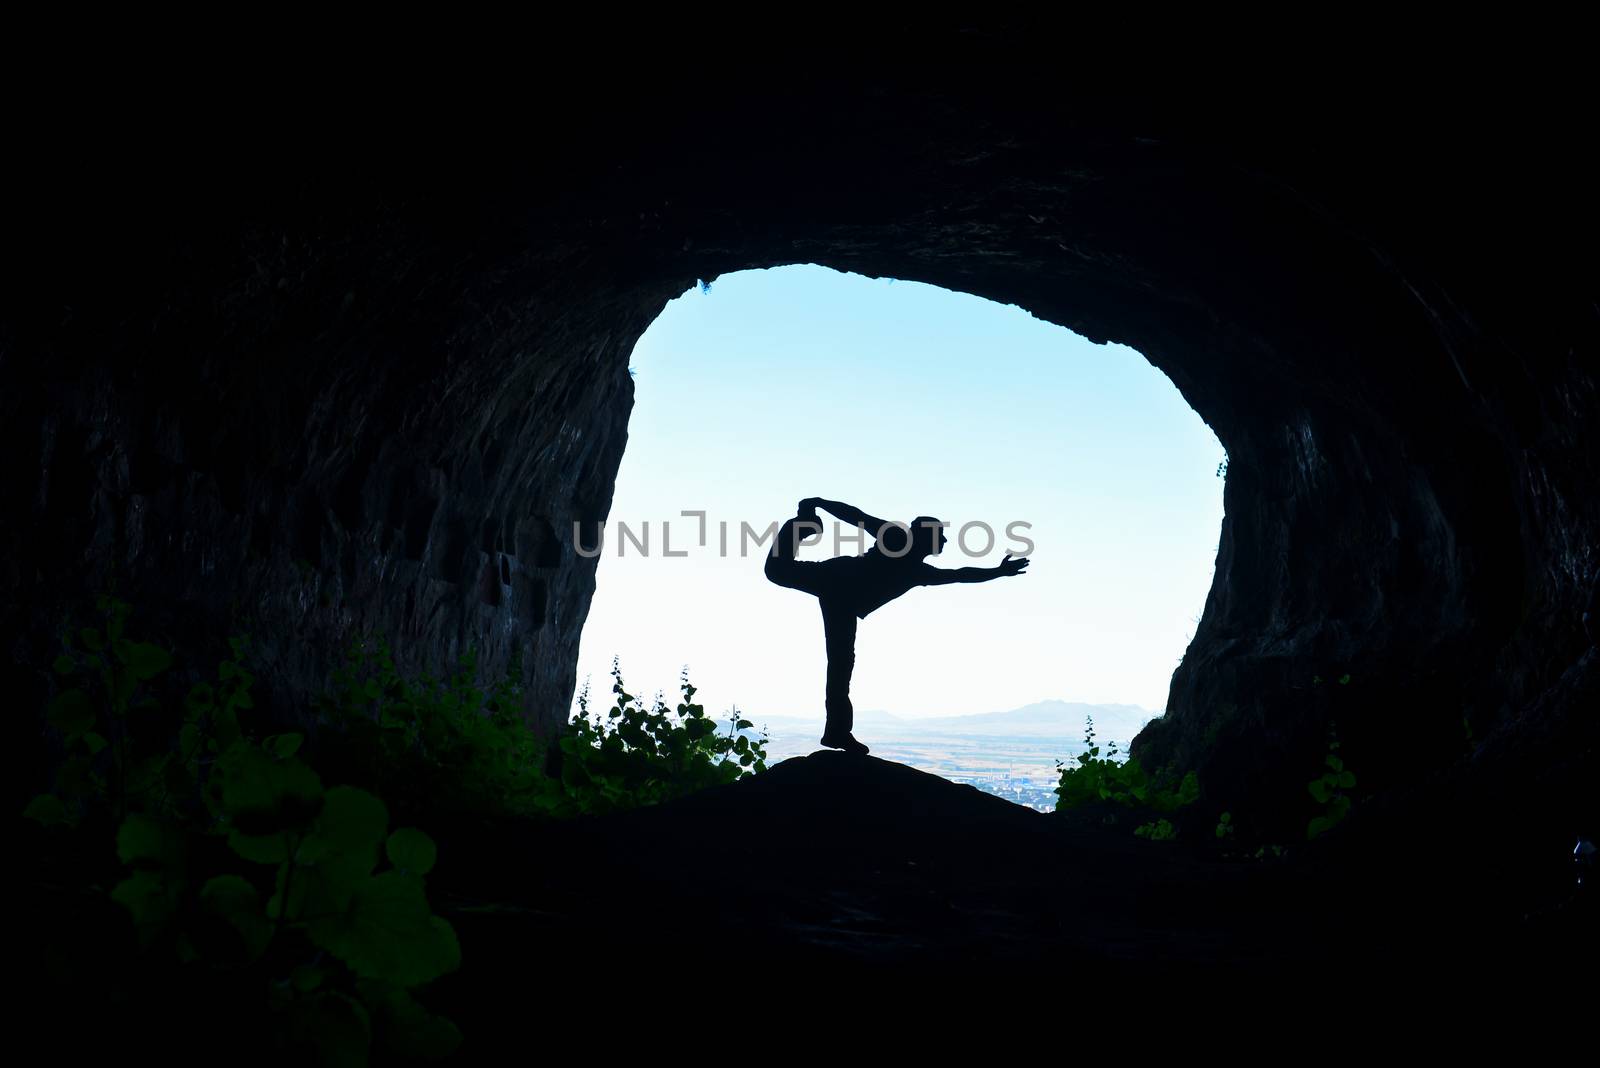 yoga positions and therapy in the cave by crazymedia007